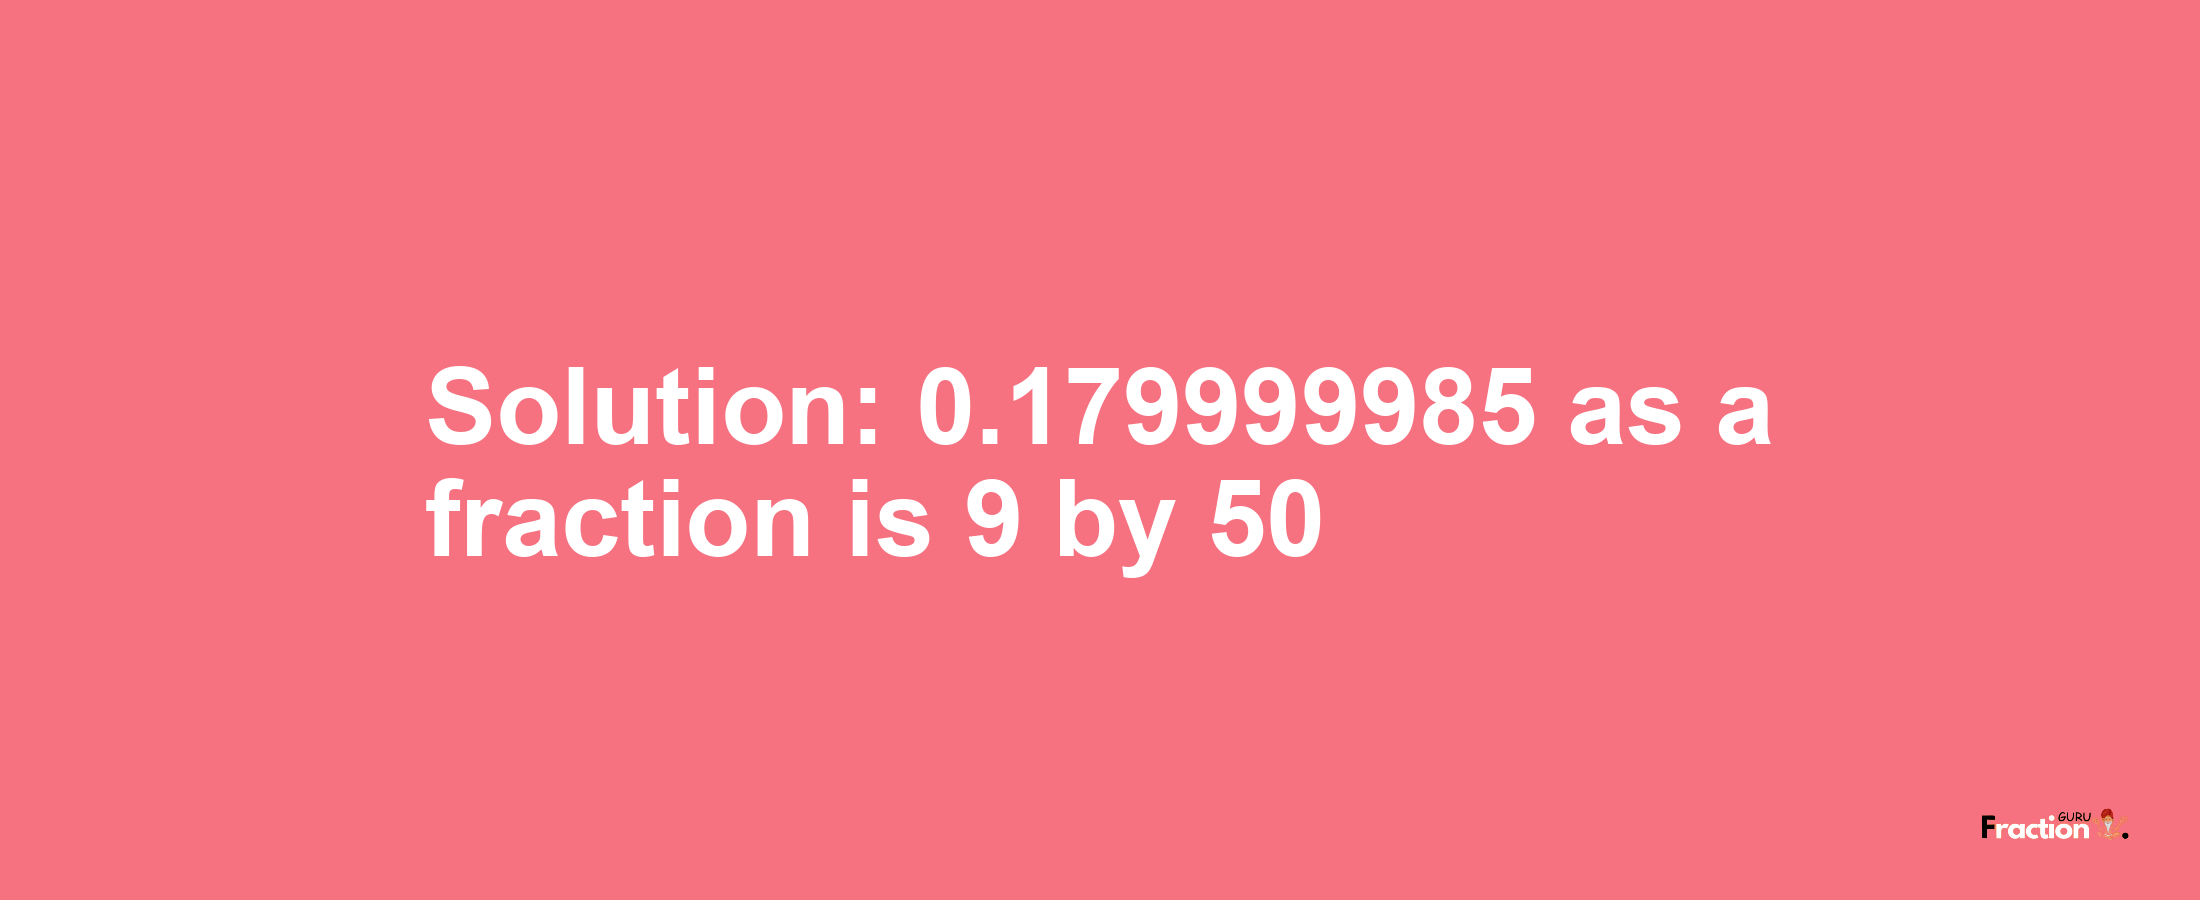 Solution:0.179999985 as a fraction is 9/50